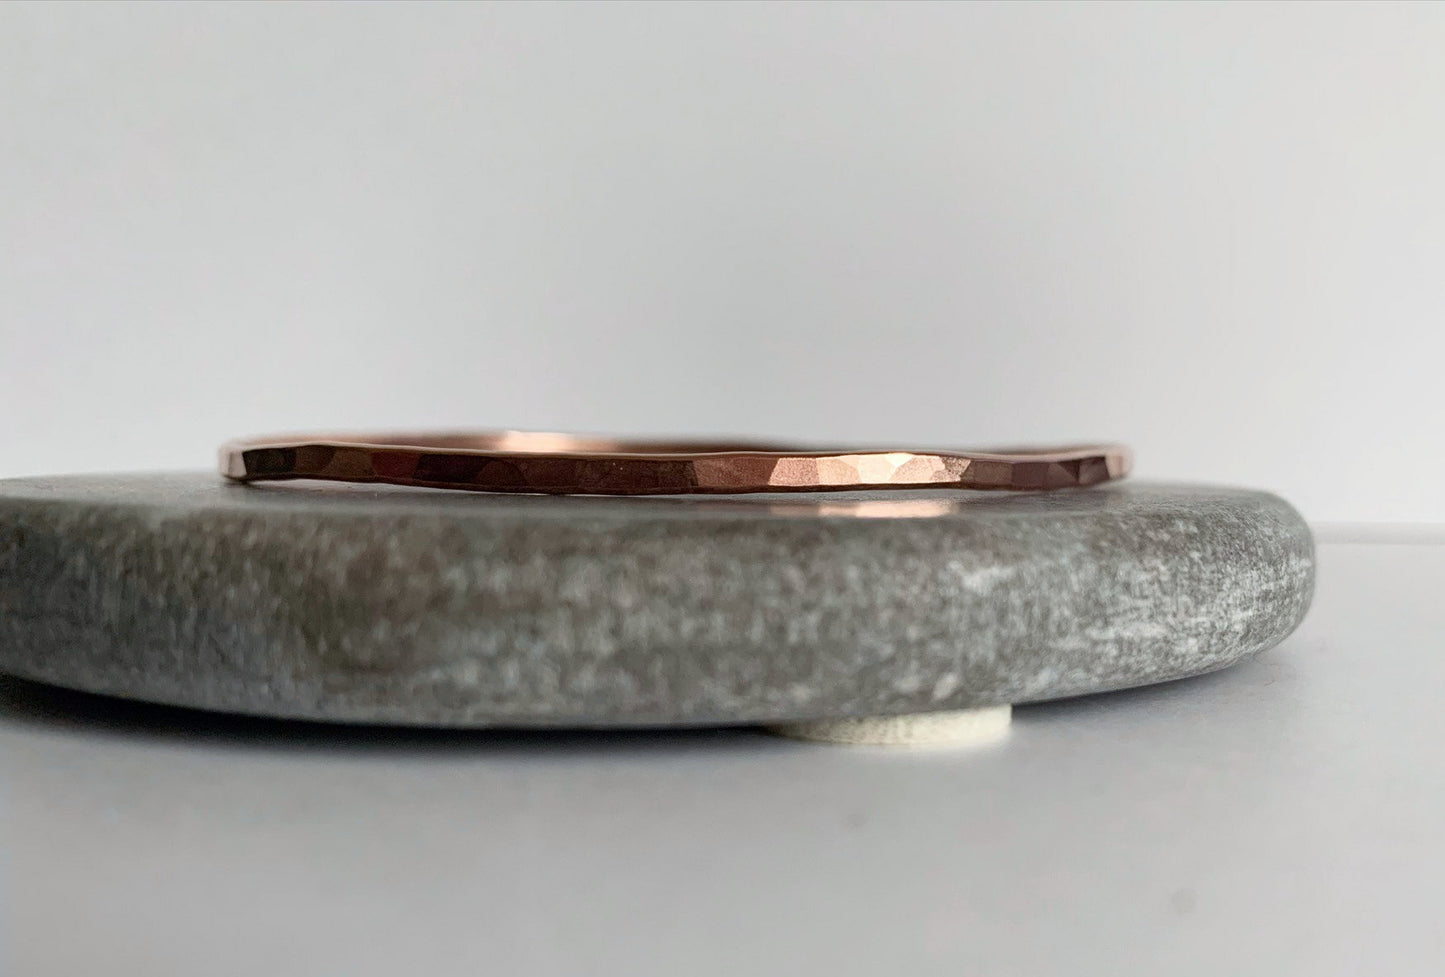 Copper bangle with light shimmer texture